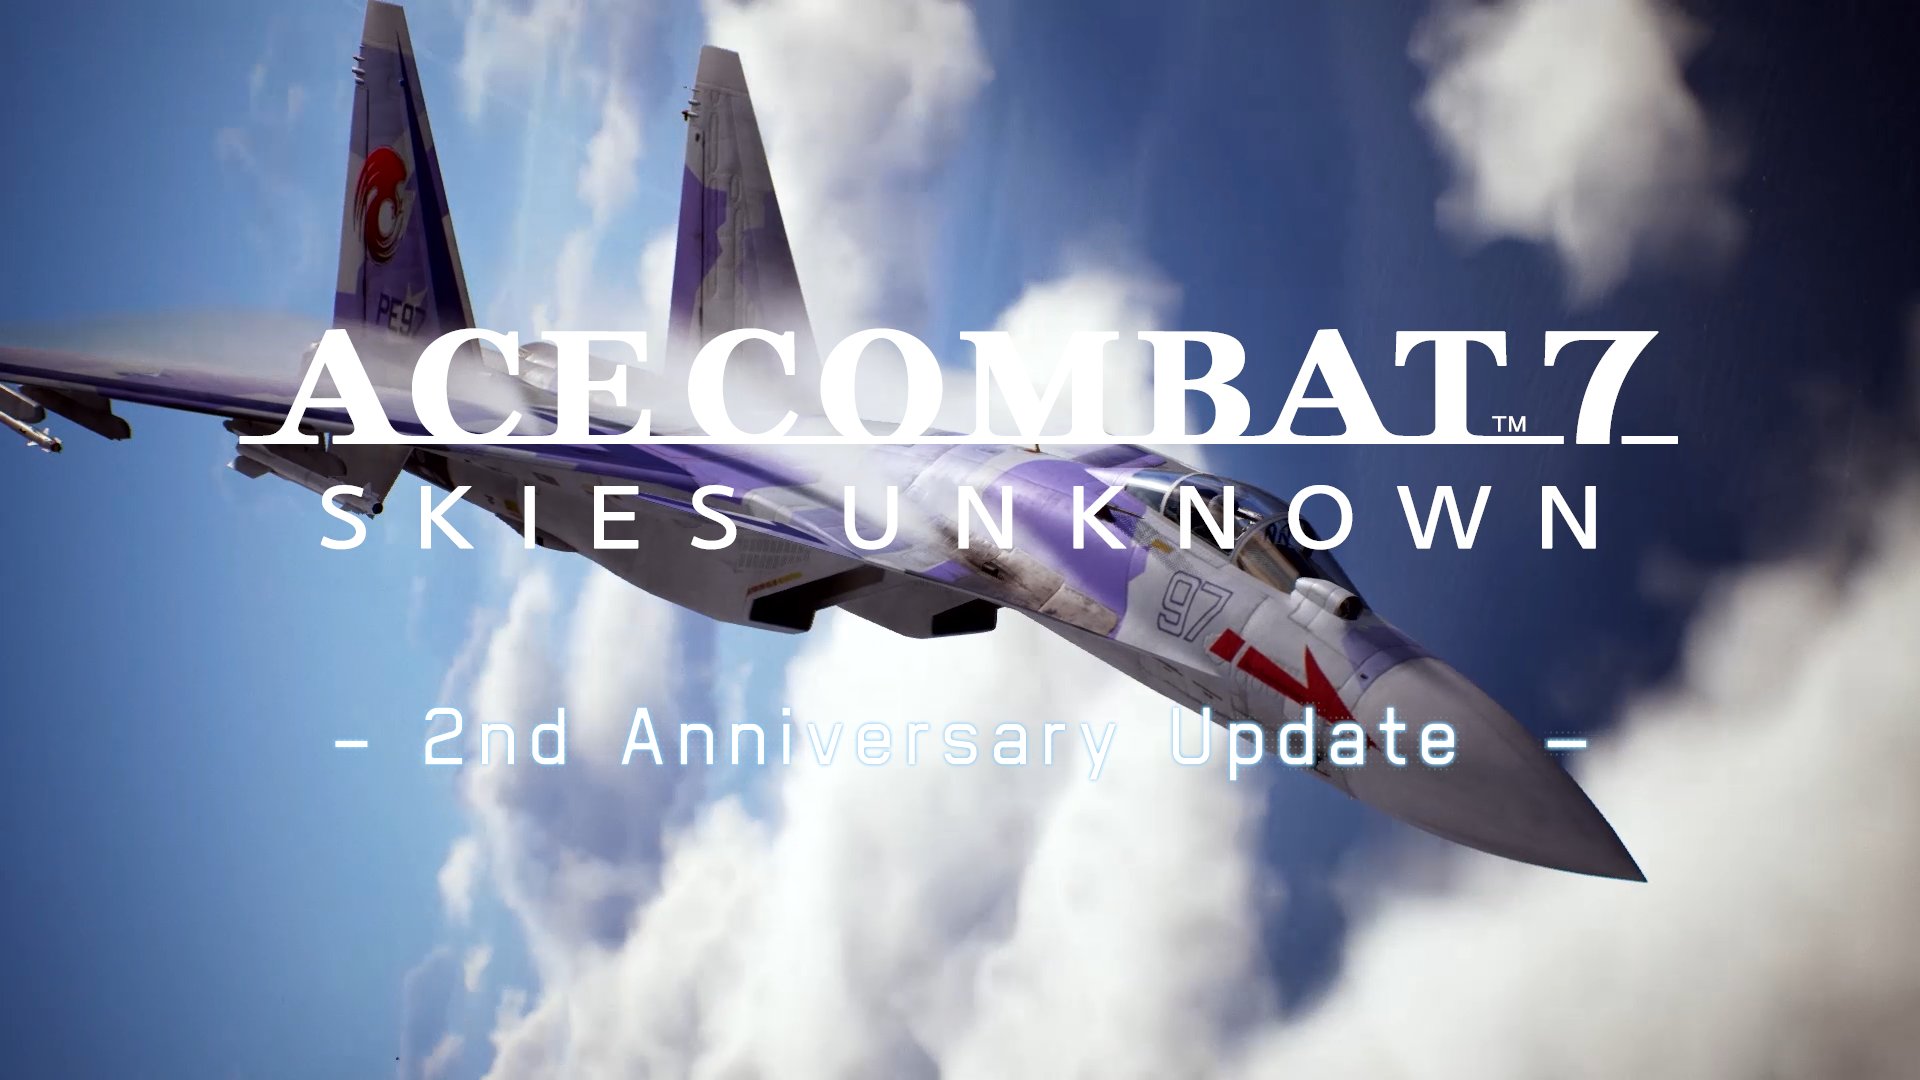 Ace Combat 7: Skies Unknown ‘2nd Anniversary Update’ launches on January 19, sales of 2.5 million